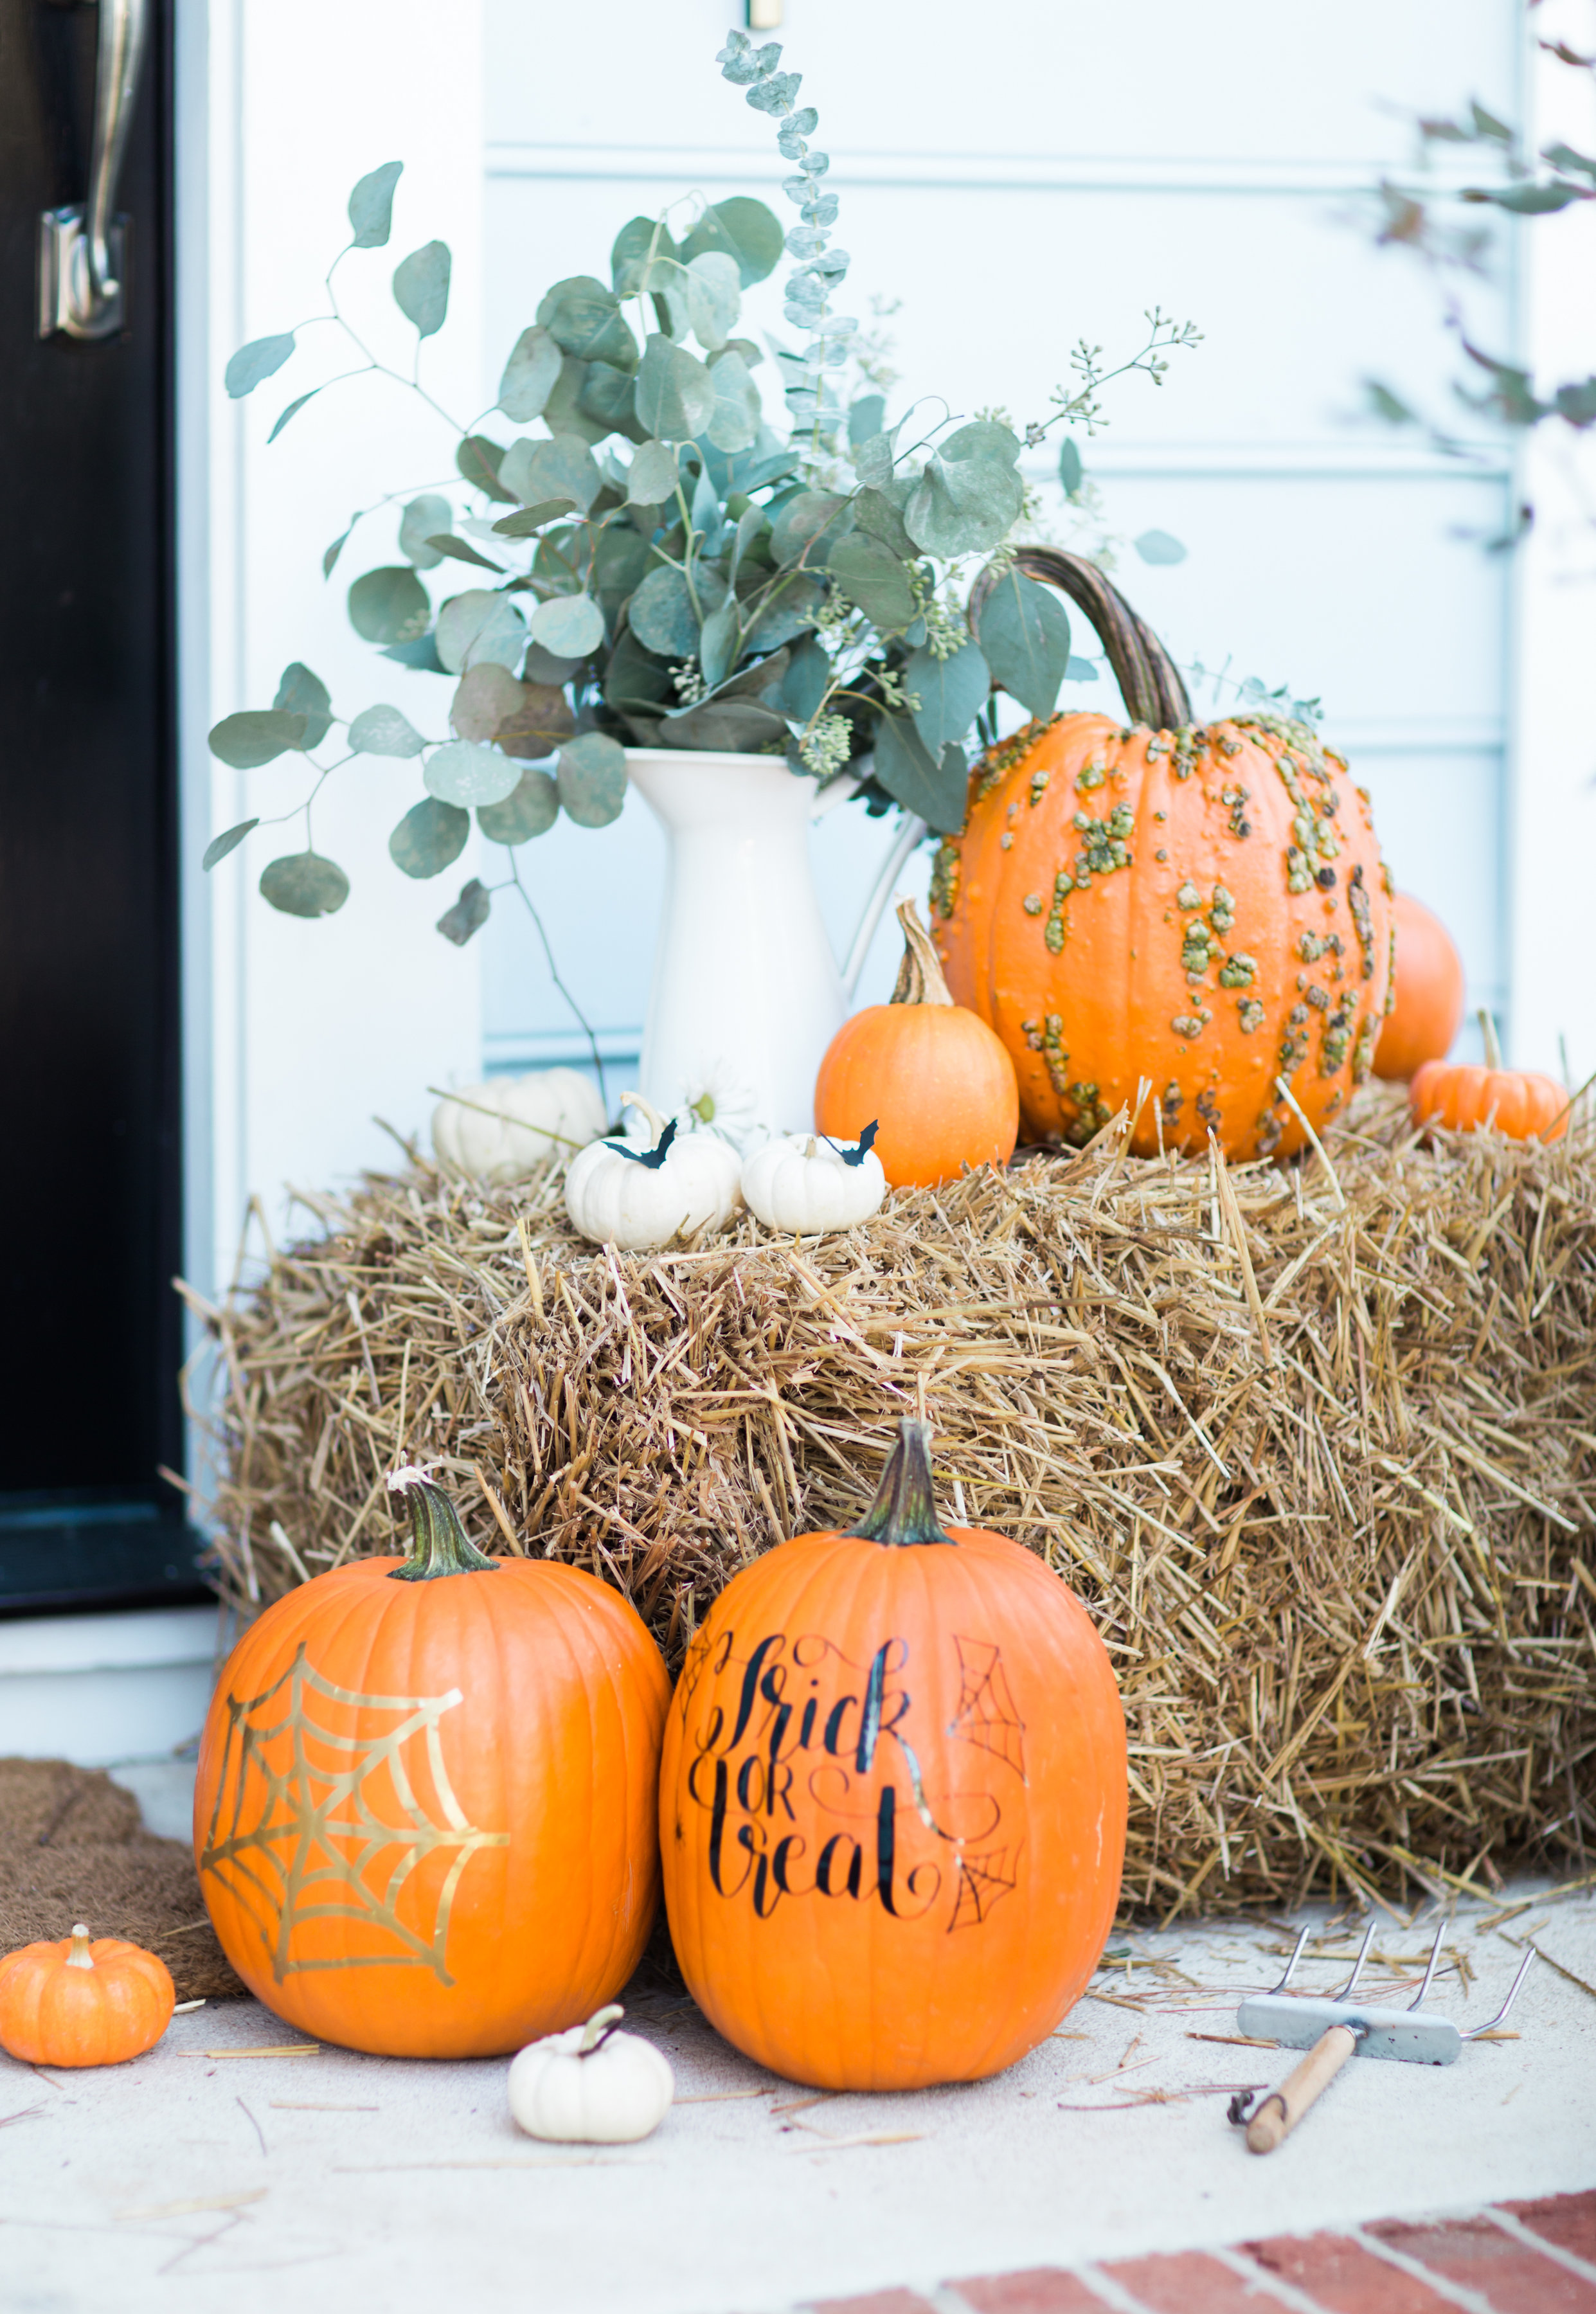 I'm revealing our Halloween Front Porch for Fall and details about how to decorate your own! Click through for the details. | glitterinc.com | @glitterinc